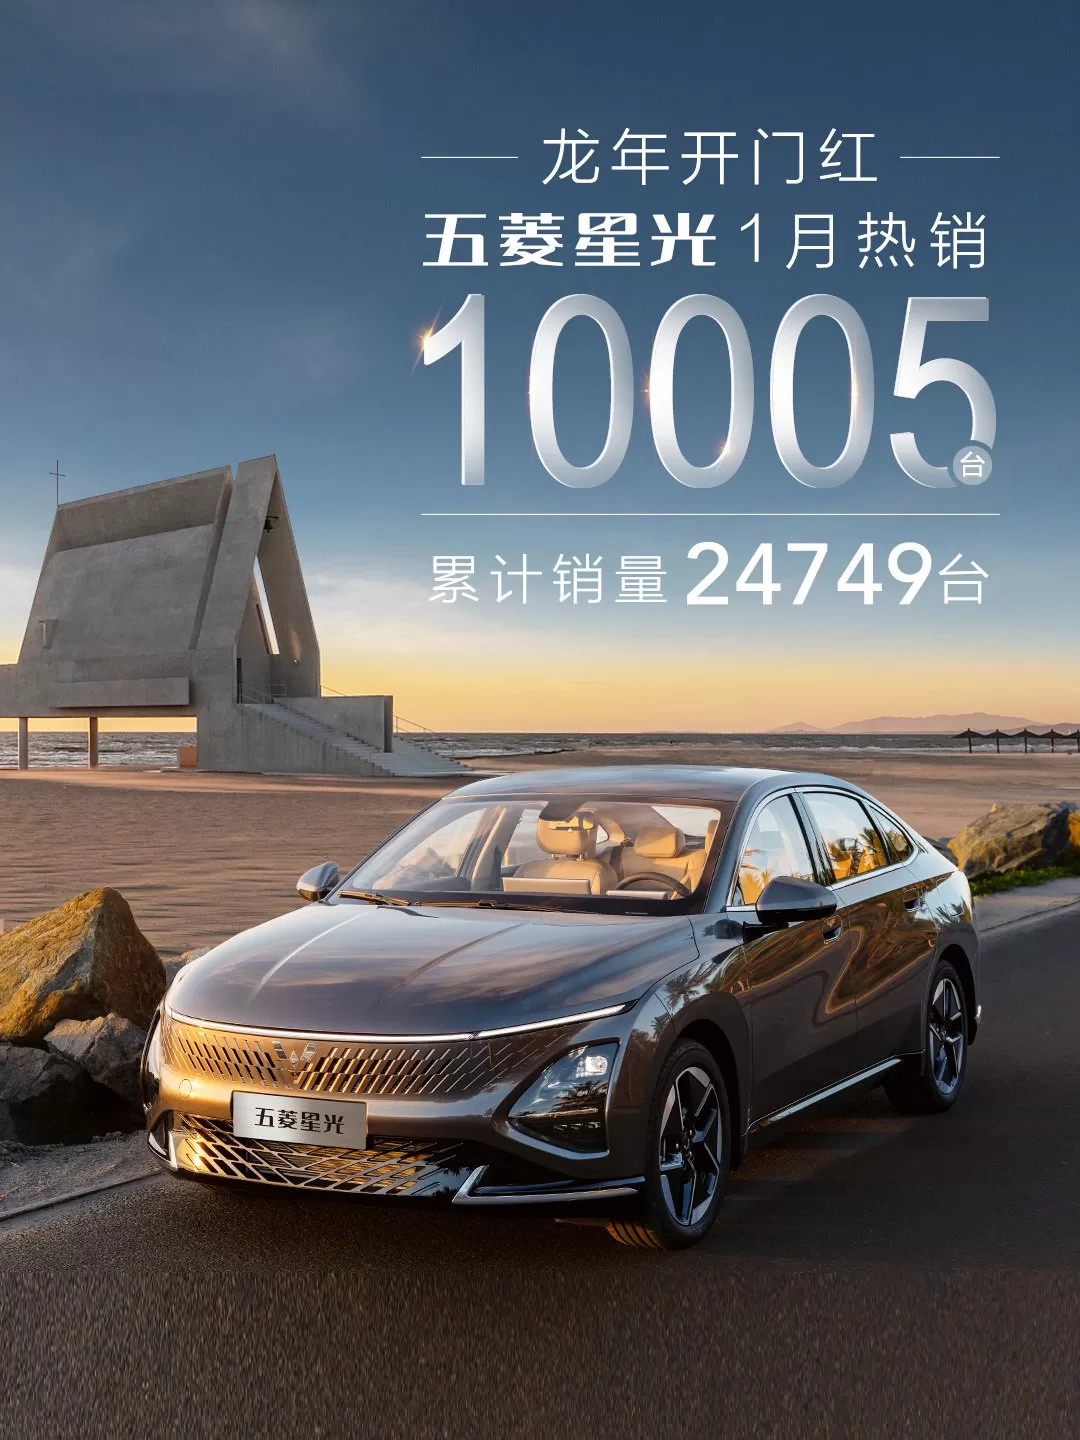 Wuling Xingguang Plug-in Hybrid Sedan Receives First OTA Upgrade, Enhancing Power and Safety Features